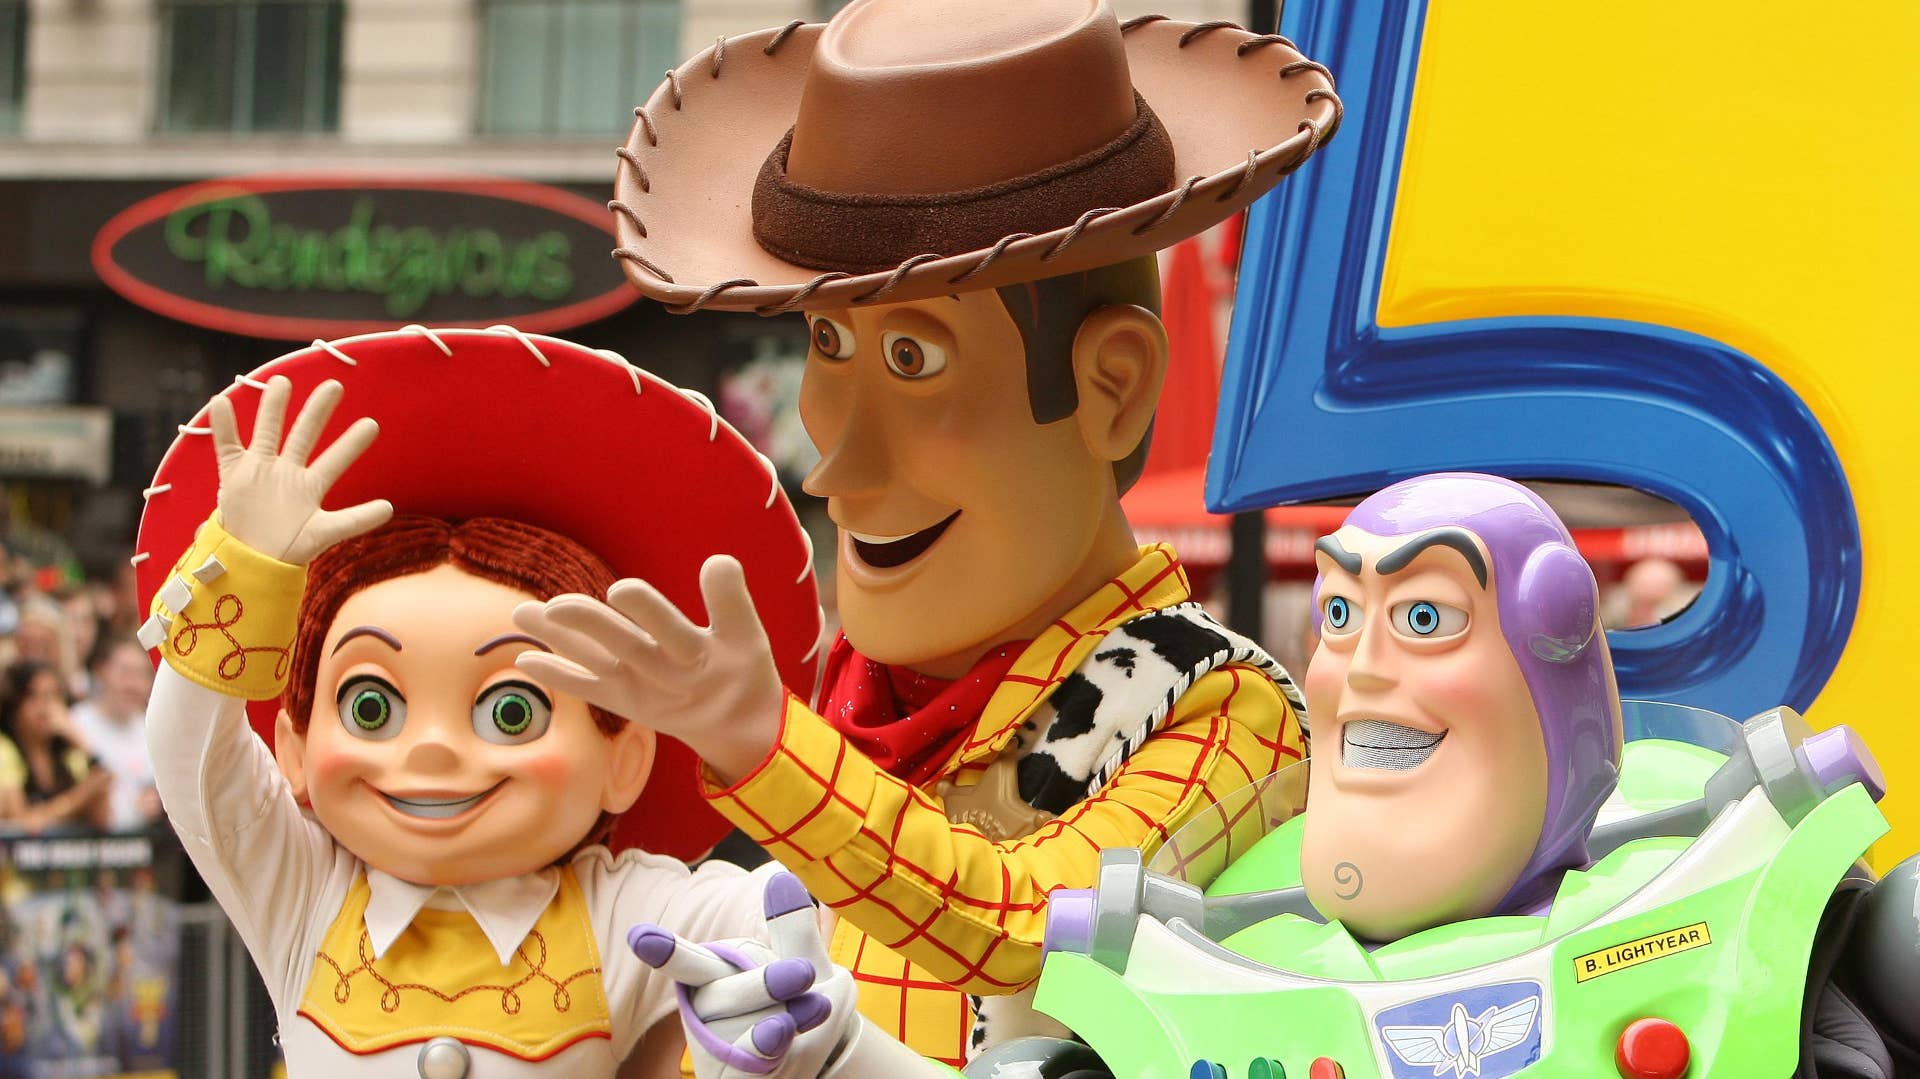 Jessie, Woody and Buzz Lightyear at the UK premiere of Toy Story 3.